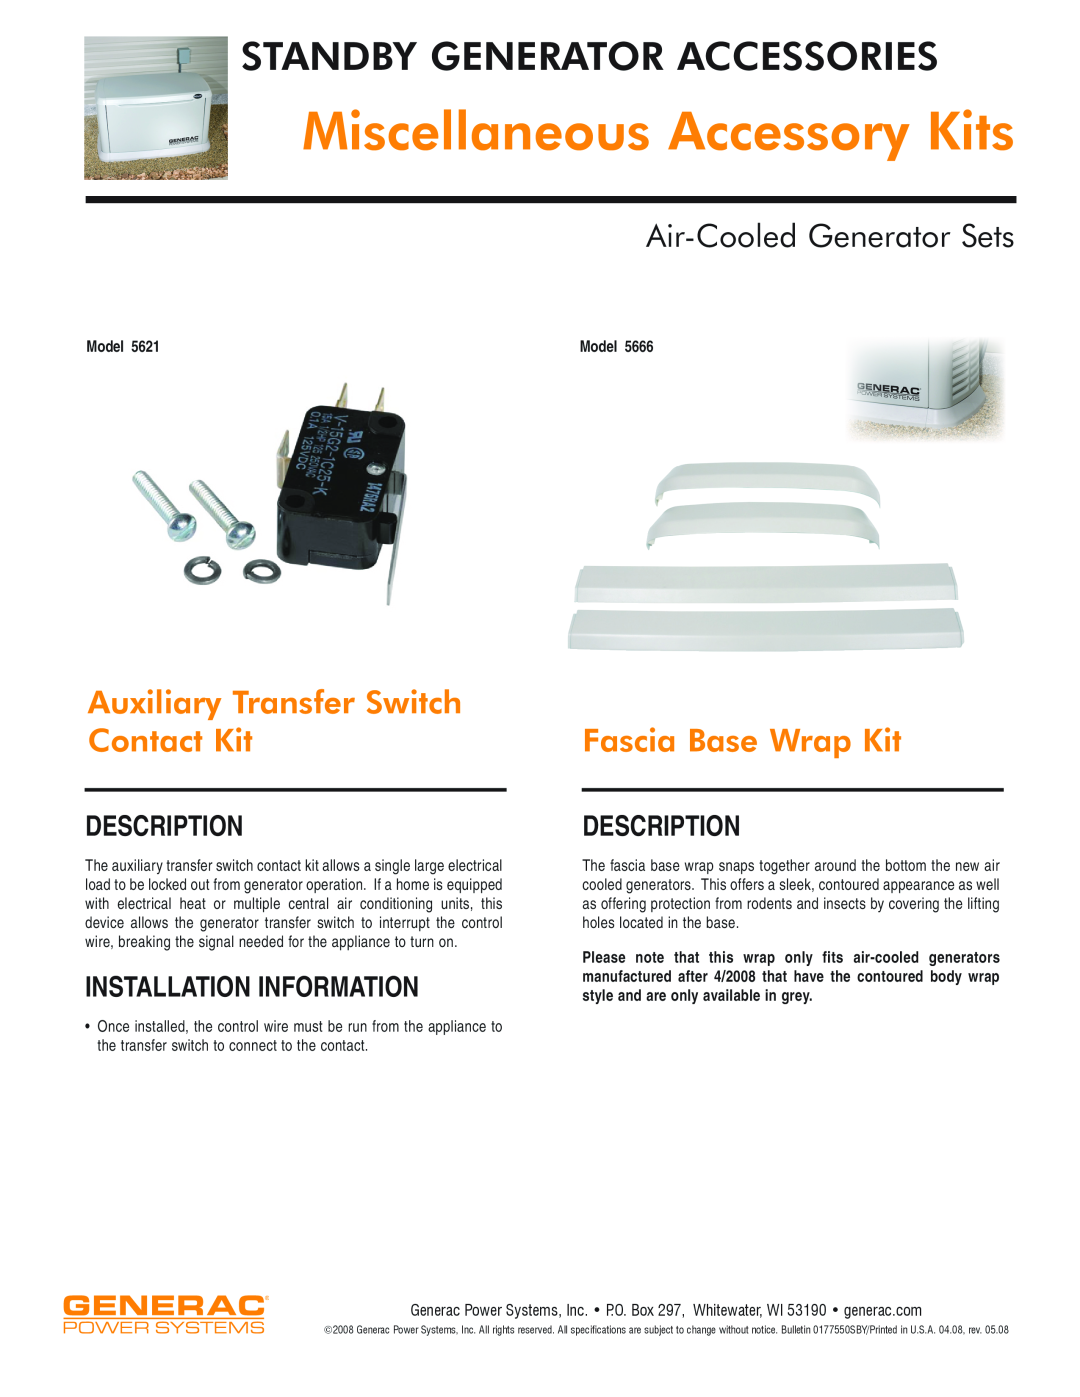 Generac Power Systems 5666 specifications Miscellaneous Accessory Kits, Standby Generator Accessories, Description, Model 